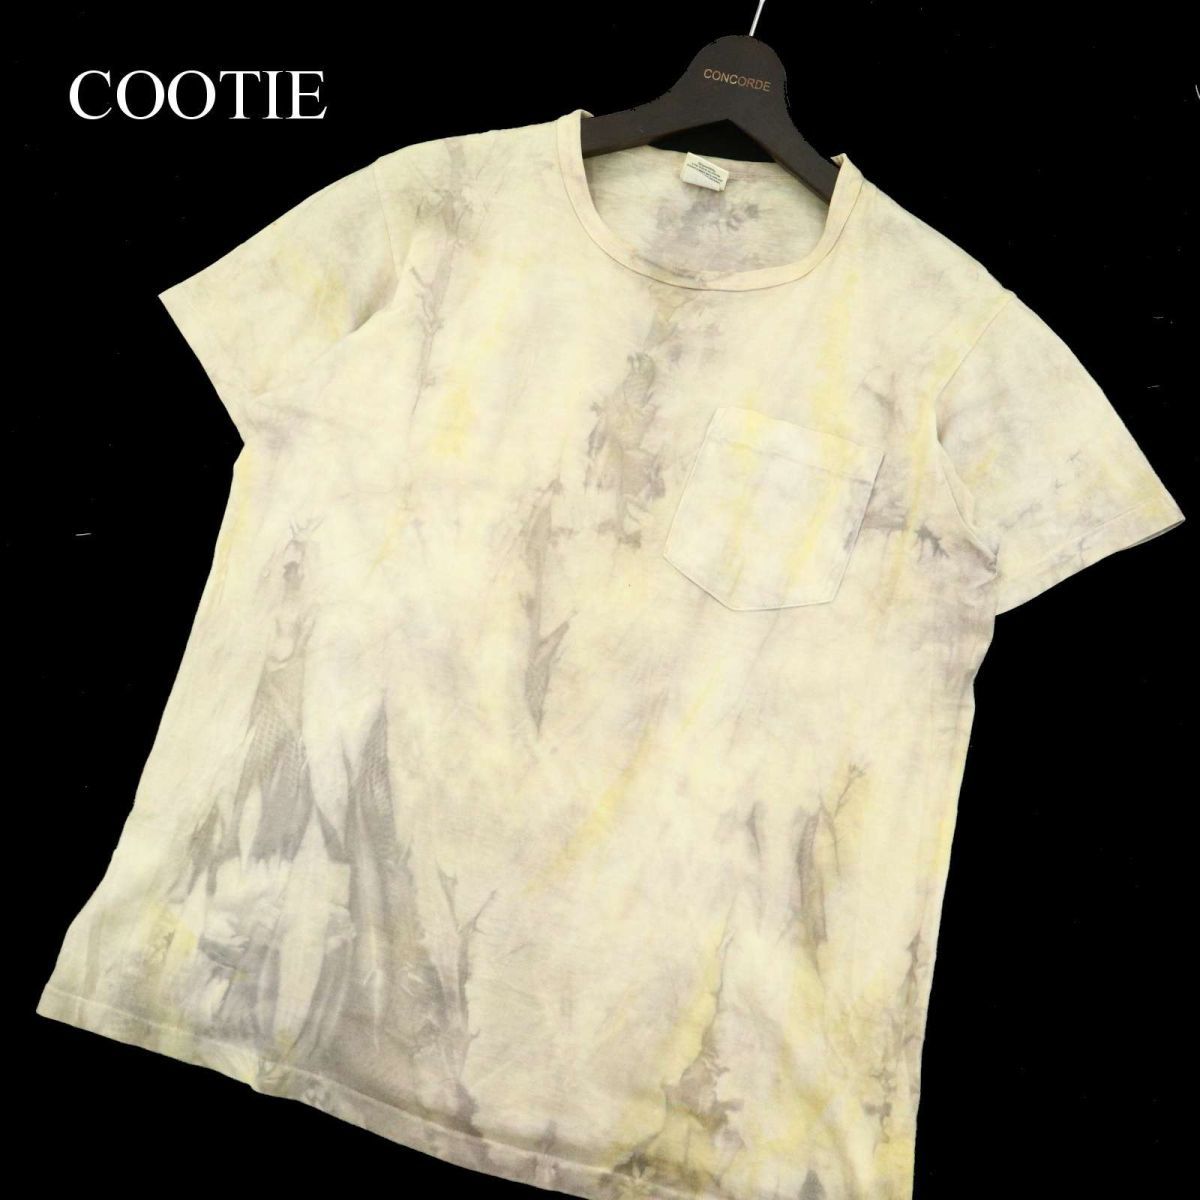 COOTIE クーティー 春夏 ムラ 総柄★ 半袖 ポケット カットソー Tシャツ Sz.S メンズ 日本製 A3T08636_7#Dの画像1